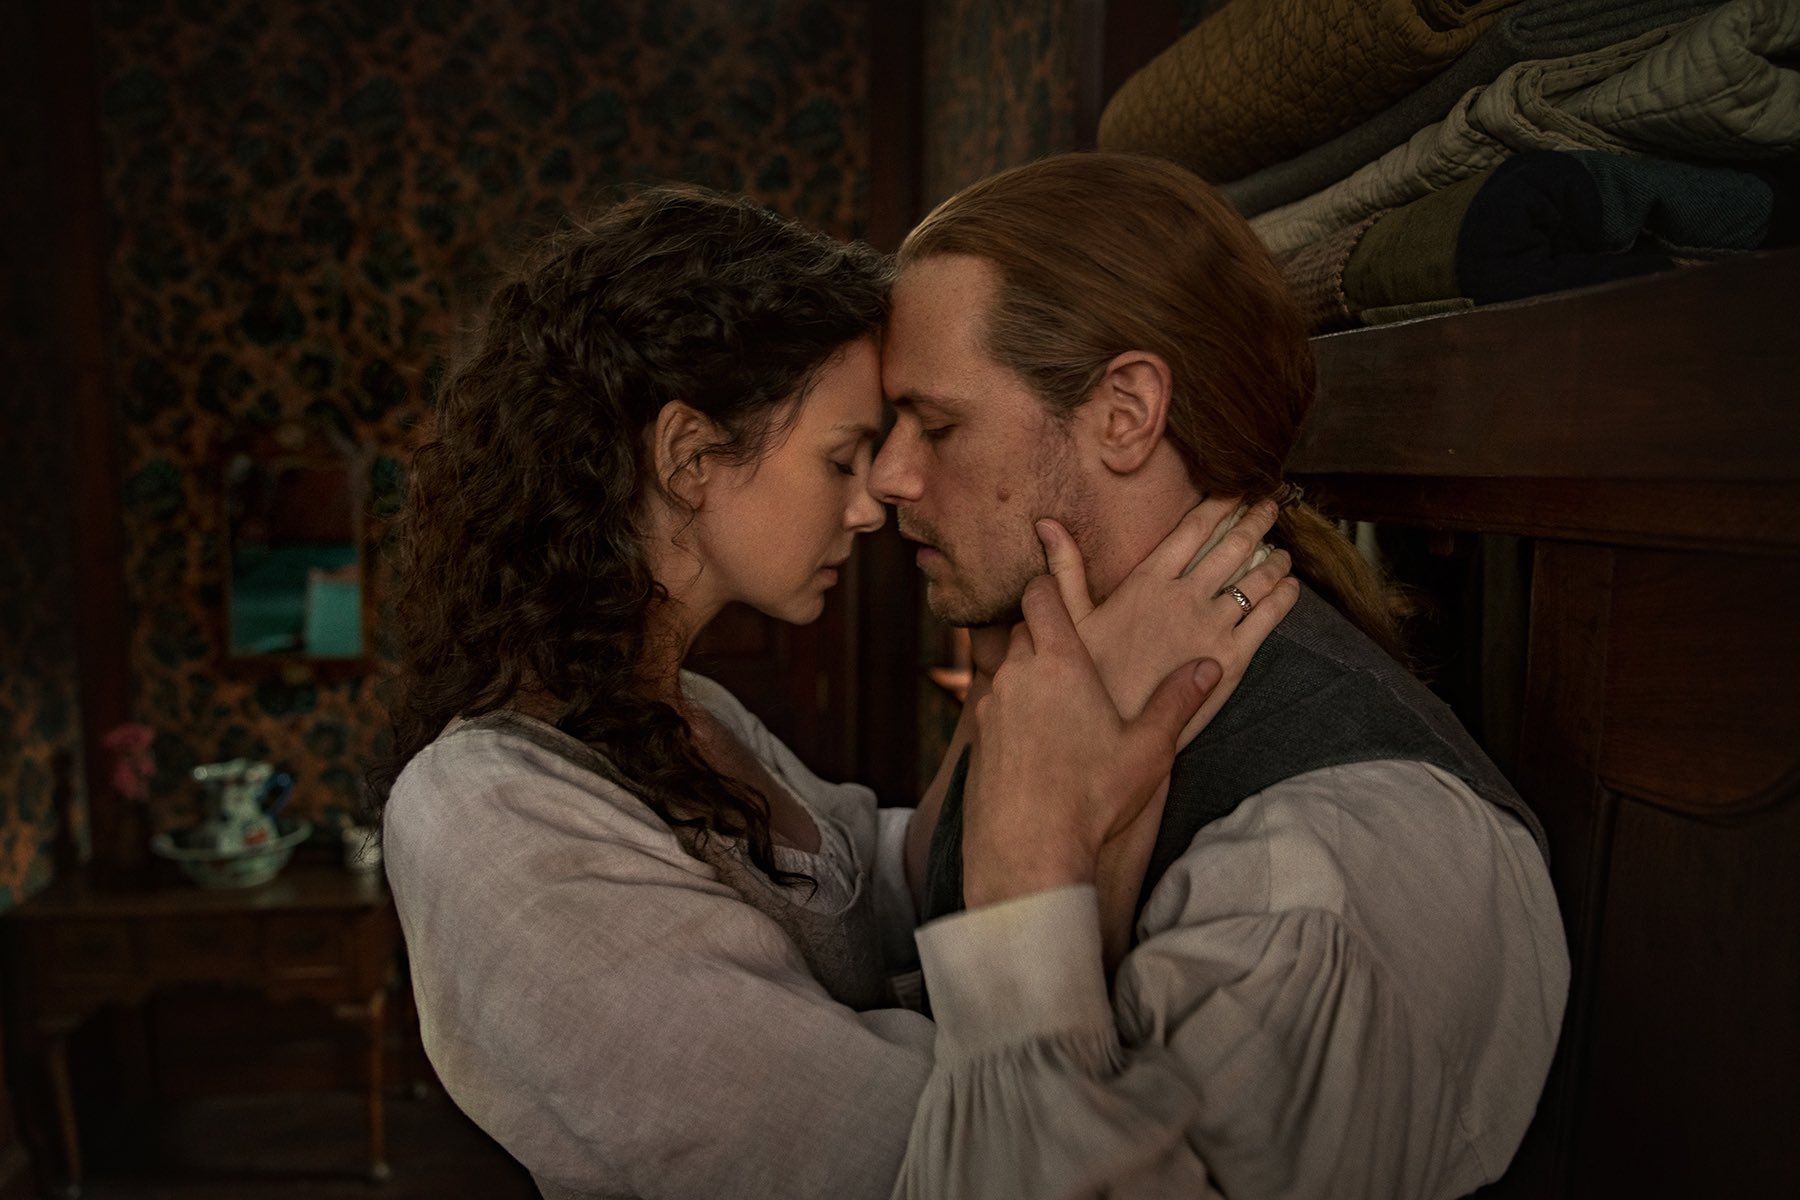 Do the outlander actors get aroused when filming sex scenes